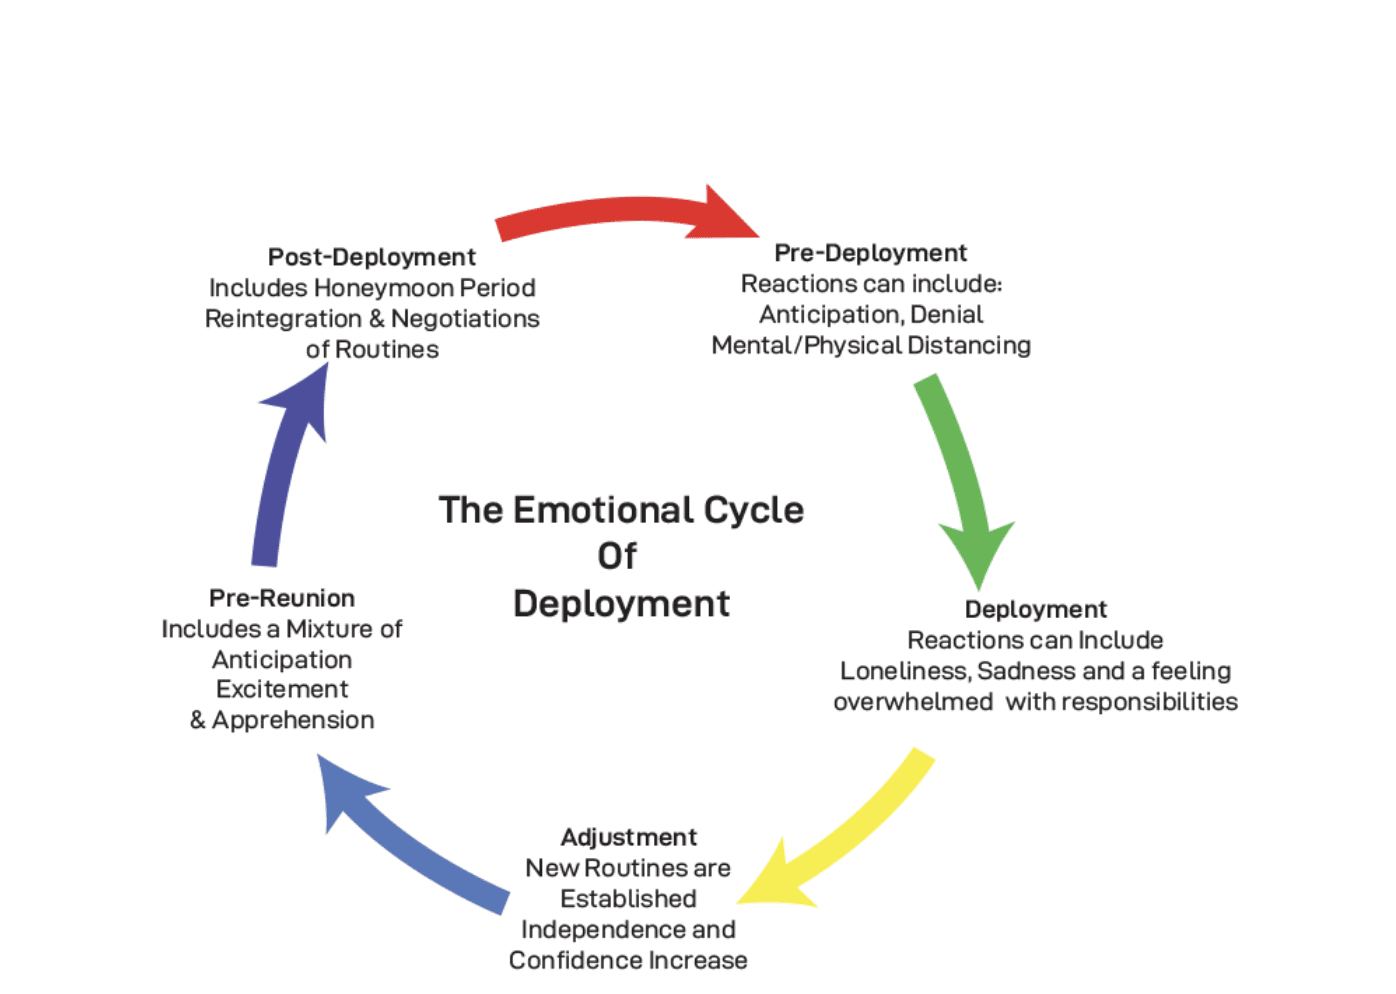 The Emotional Cycle of Deployment